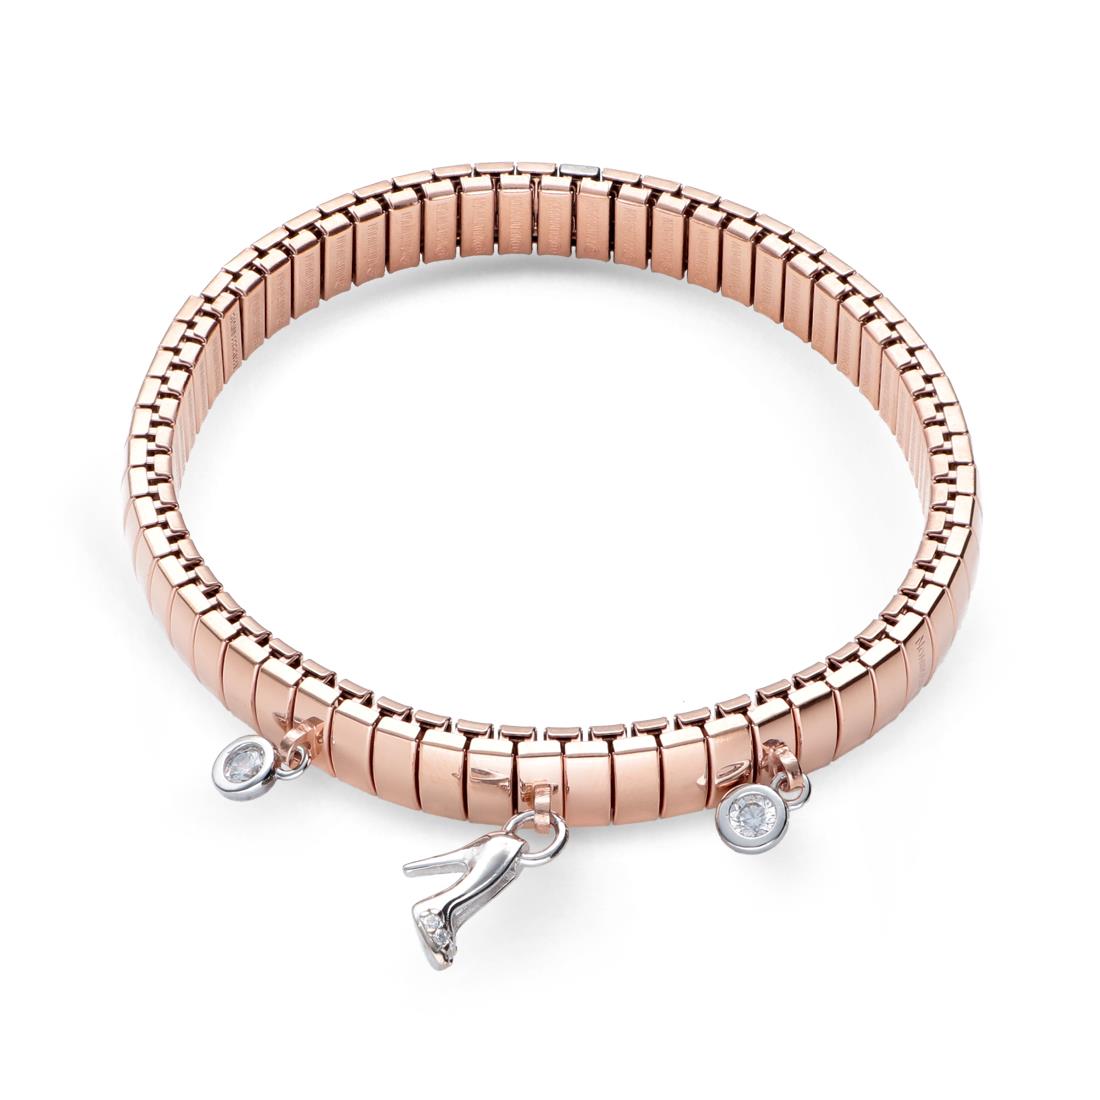 Bracelet with charms - NOMINATION